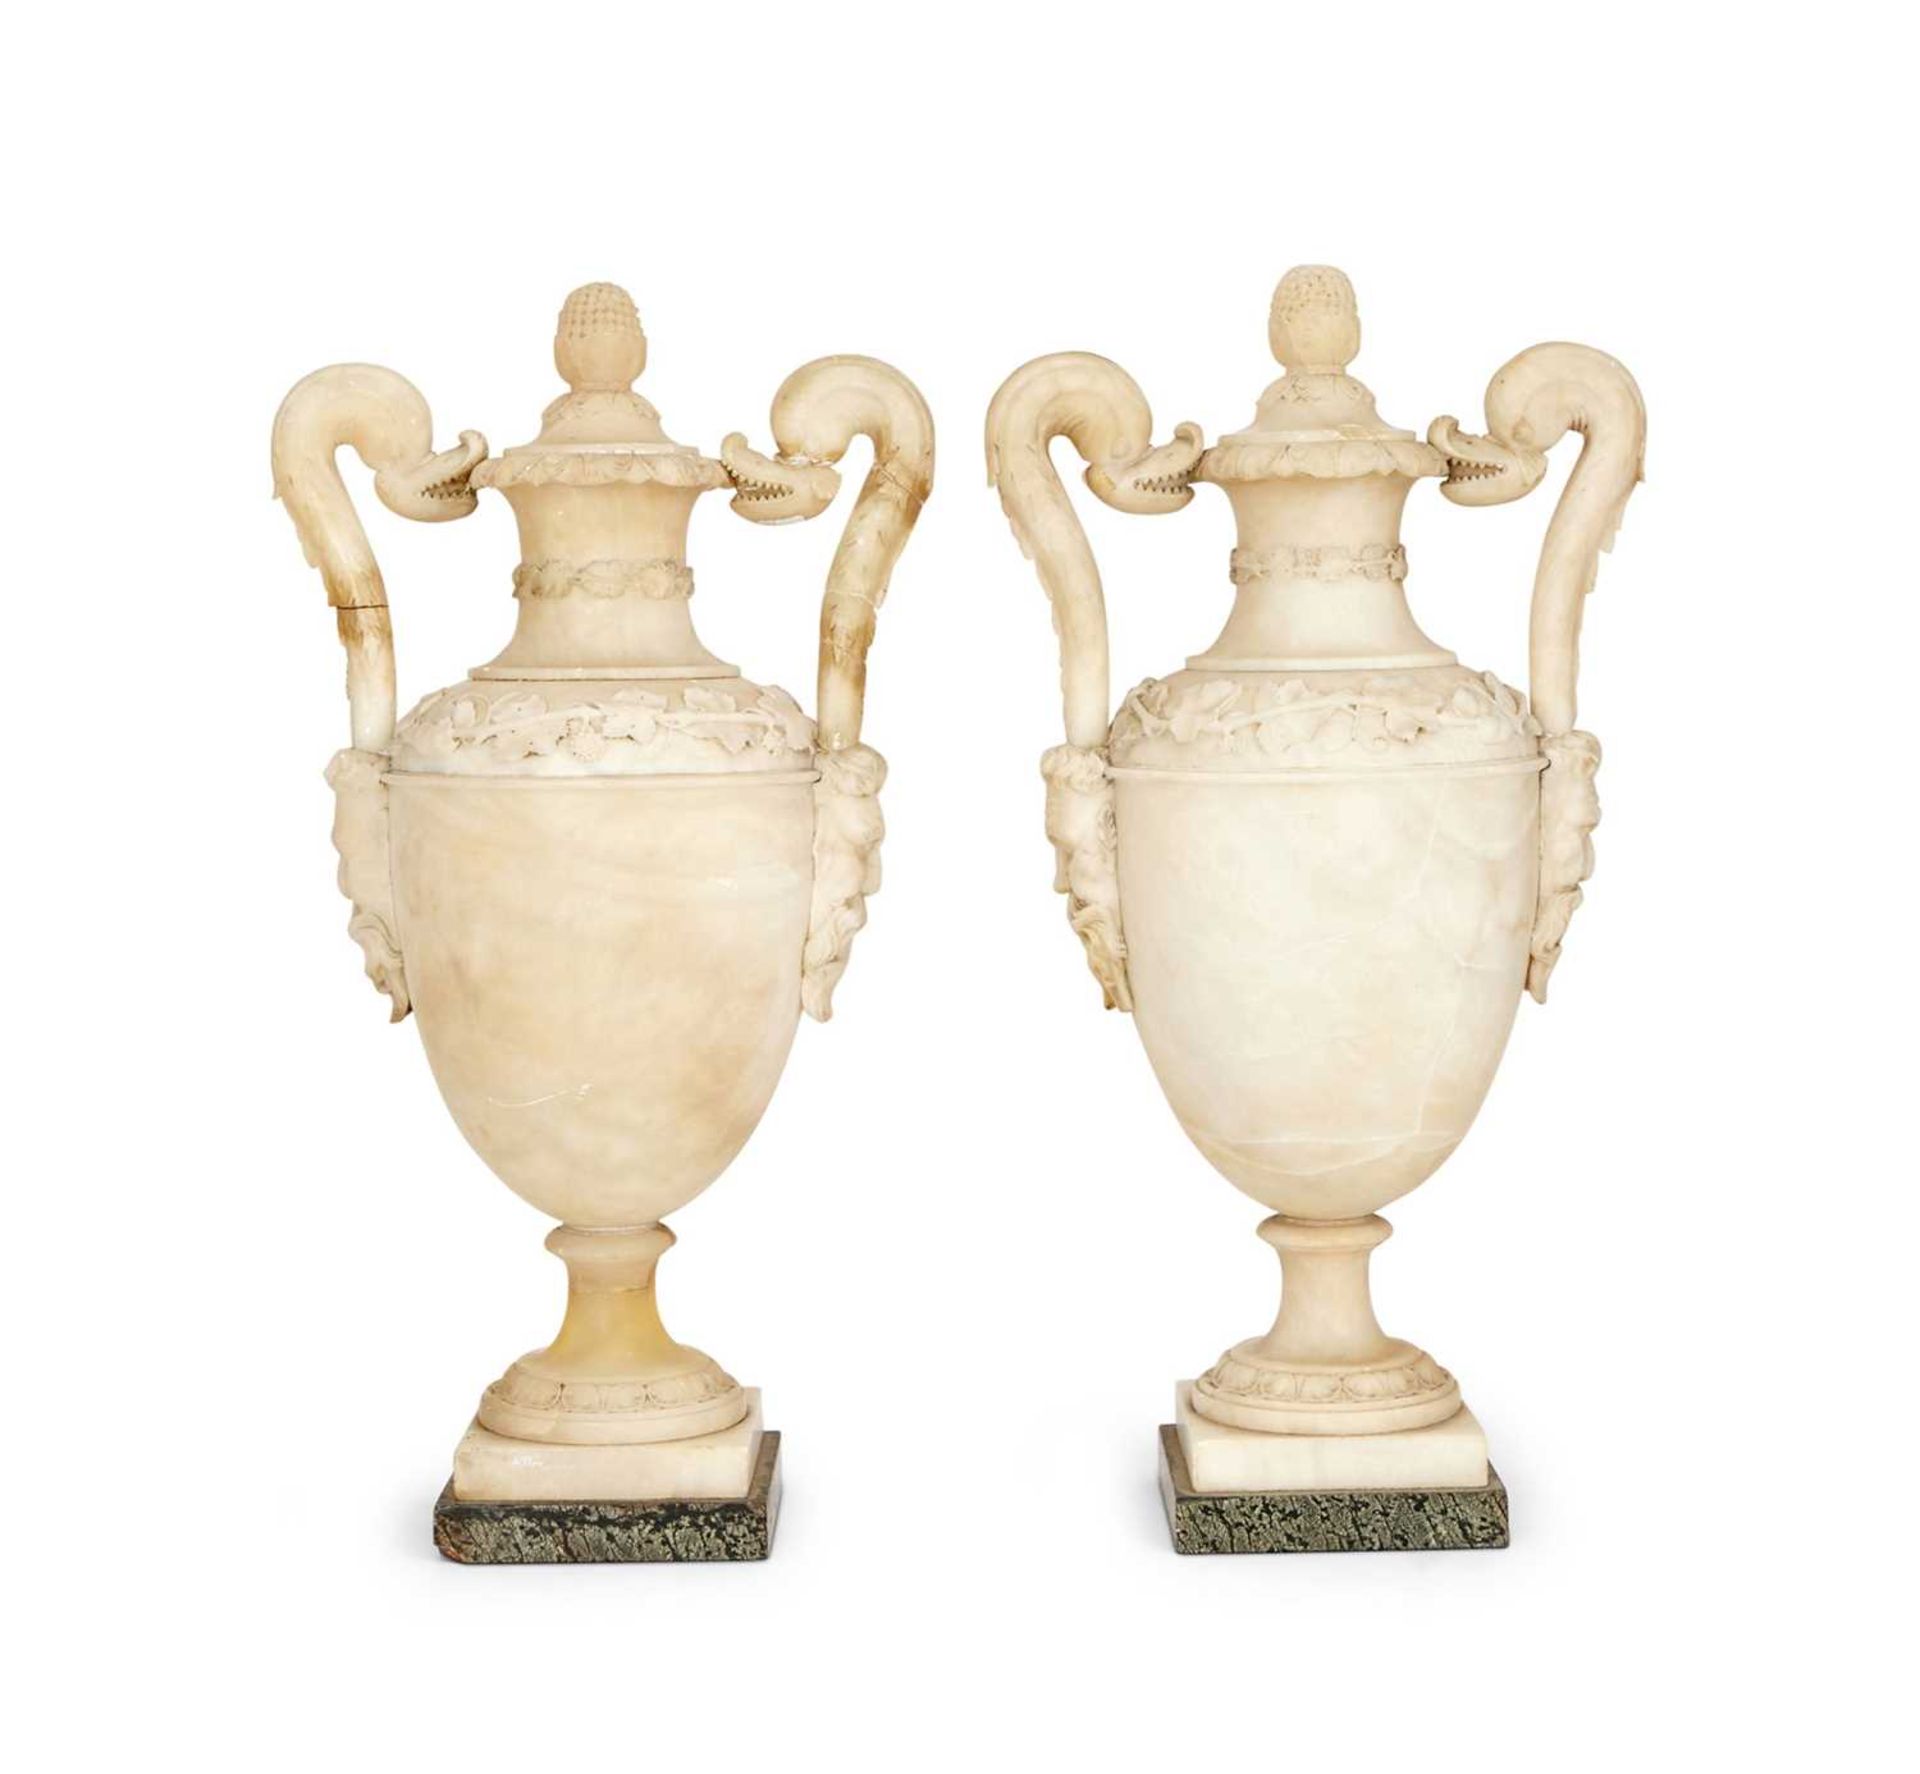 A LARGE PAIR OF 19TH CENTURY ITALIAN ALABASTER URNS AND COVERS IN THE STYLE OF PIRANESI - Image 4 of 12